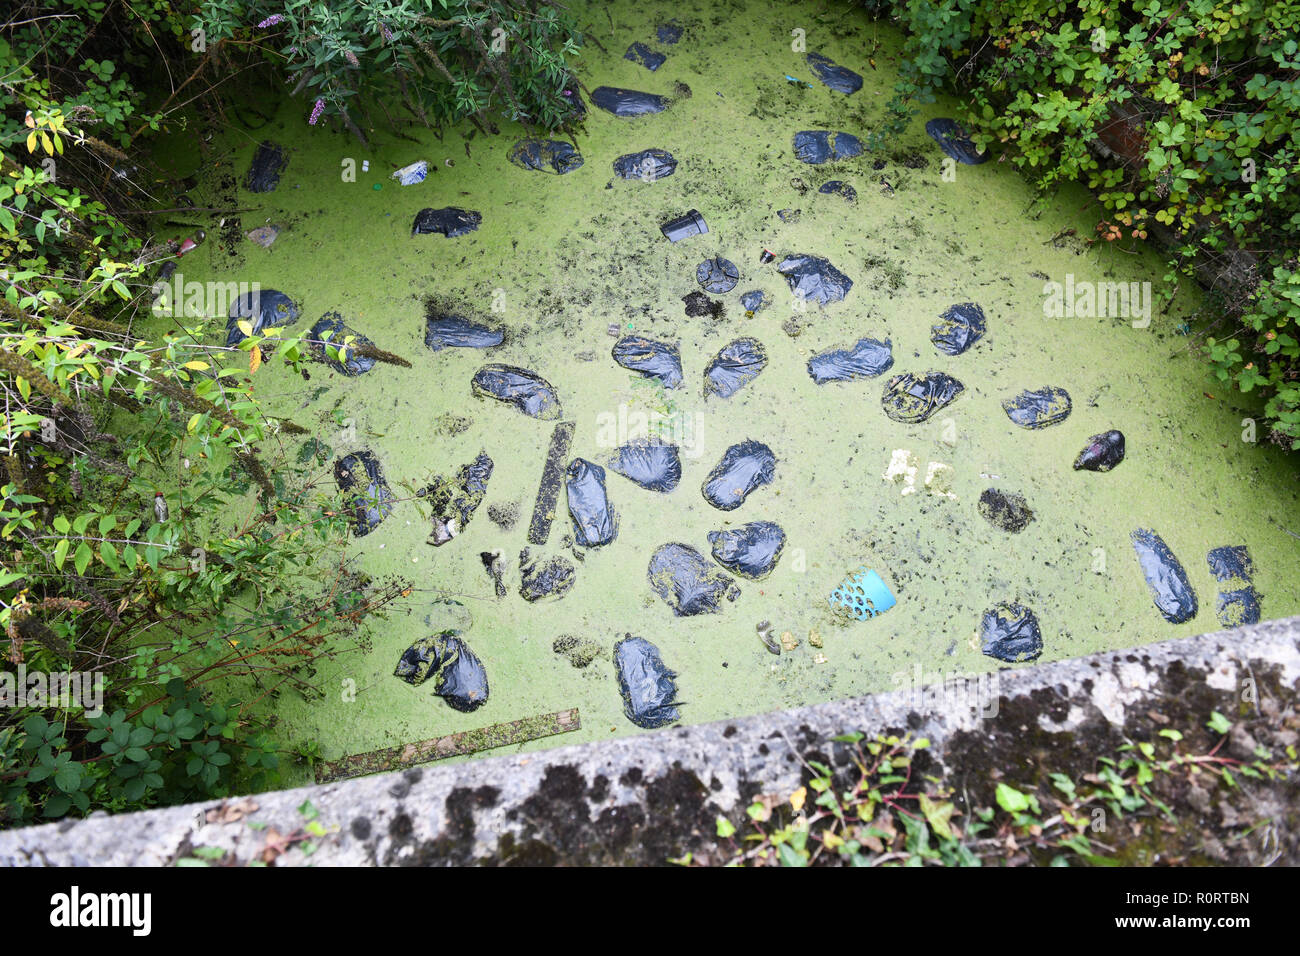 Rubbish which has been dumped in the a canal. The green coloured water is filled with black plastic bags of rubbish. Stock Photo